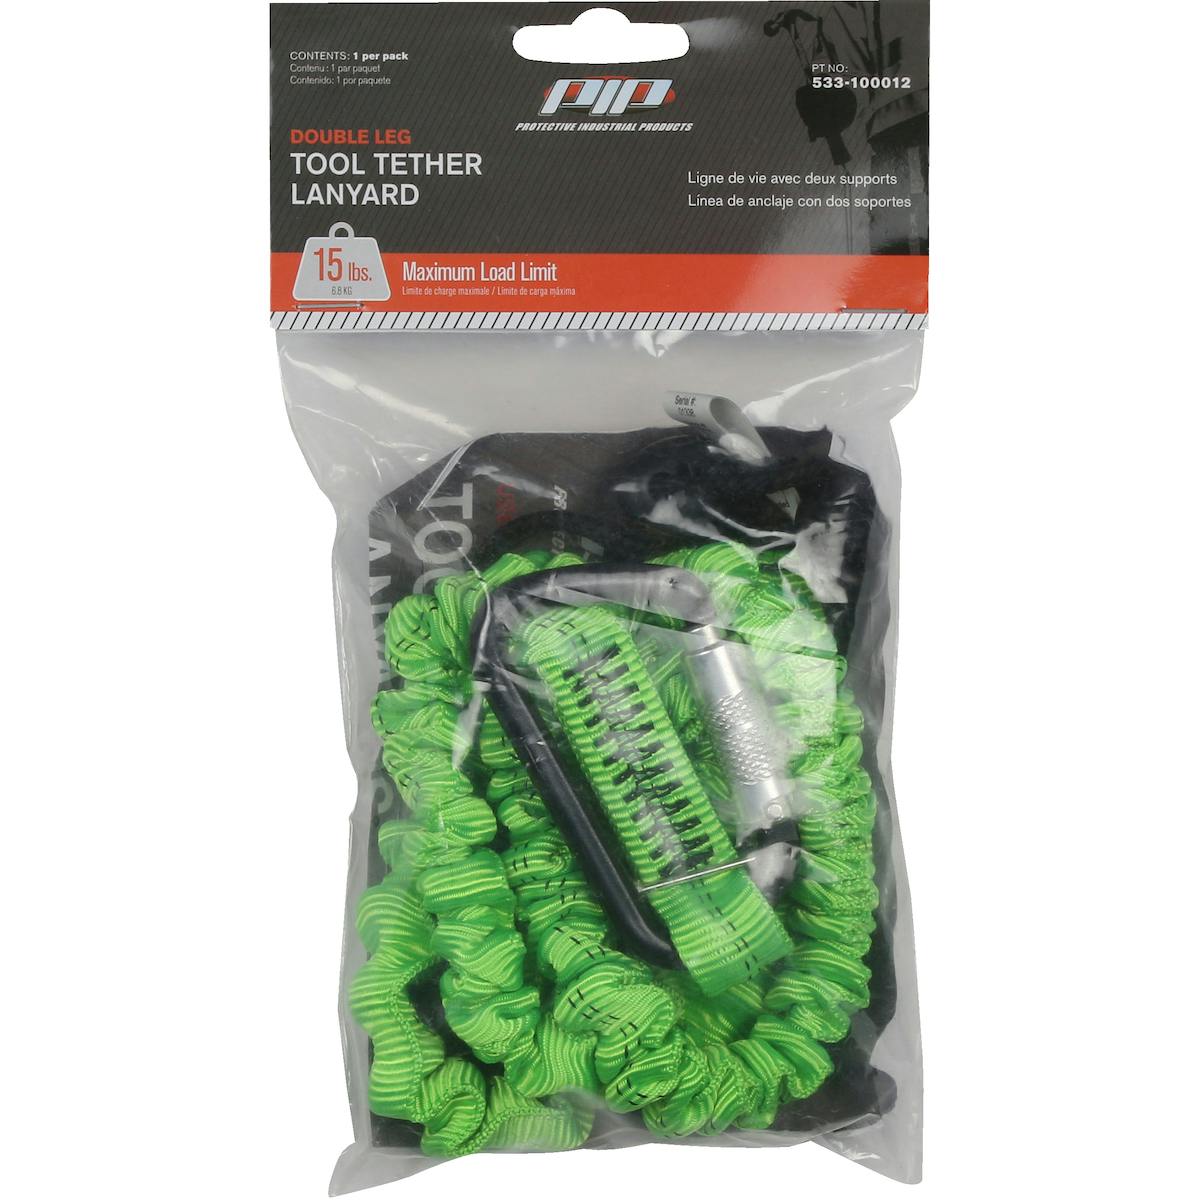 Double Leg Tool Tethering Lanyard - 10 lbs. maximum load limit - Retail Packaged, Green (533-100012) - OS